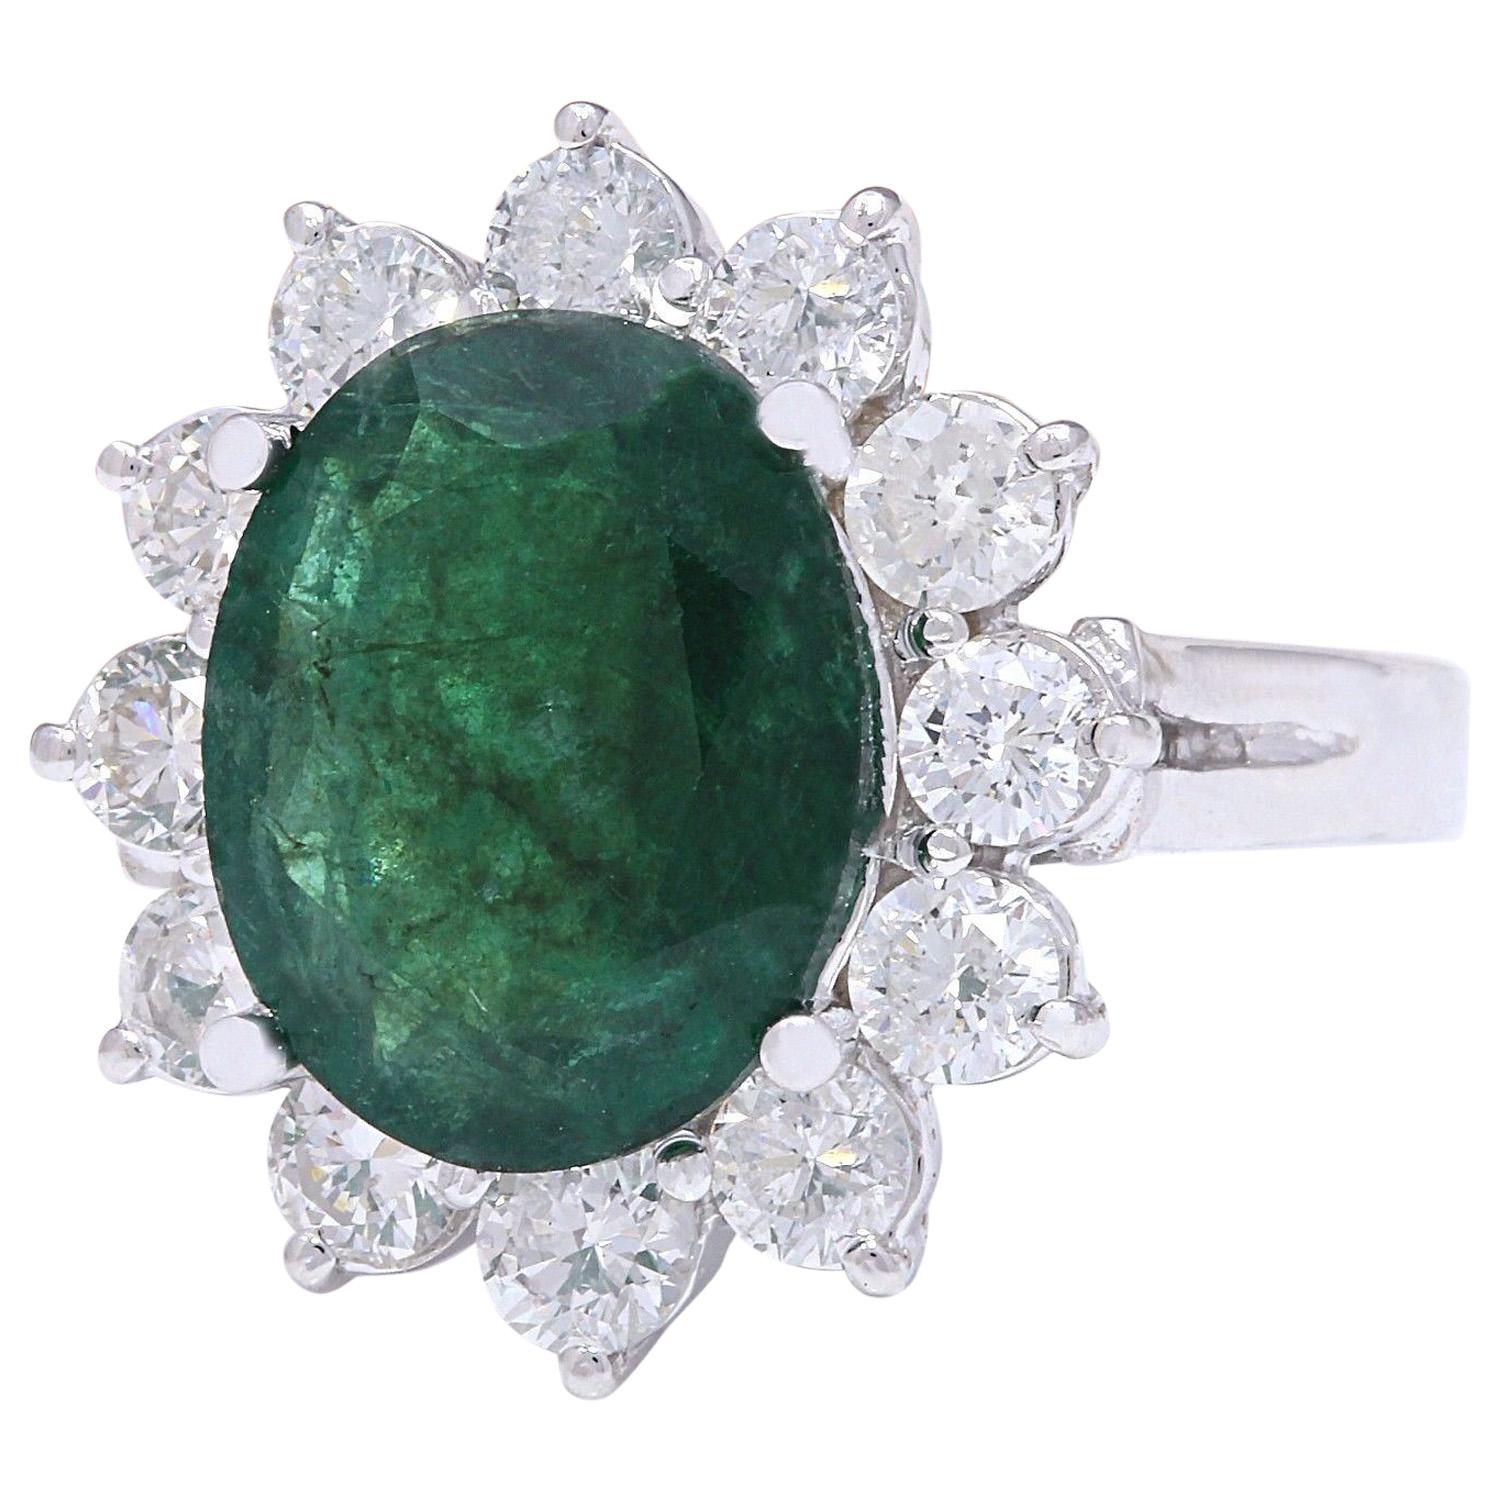 Crafted with elegance, this exquisite ring features a 4.68 carat natural emerald set in lustrous 14K white gold. The captivating oval-shaped emerald, weighing 3.48 carats and measuring 11.00x9.00 mm, commands attention with its rich green hue.